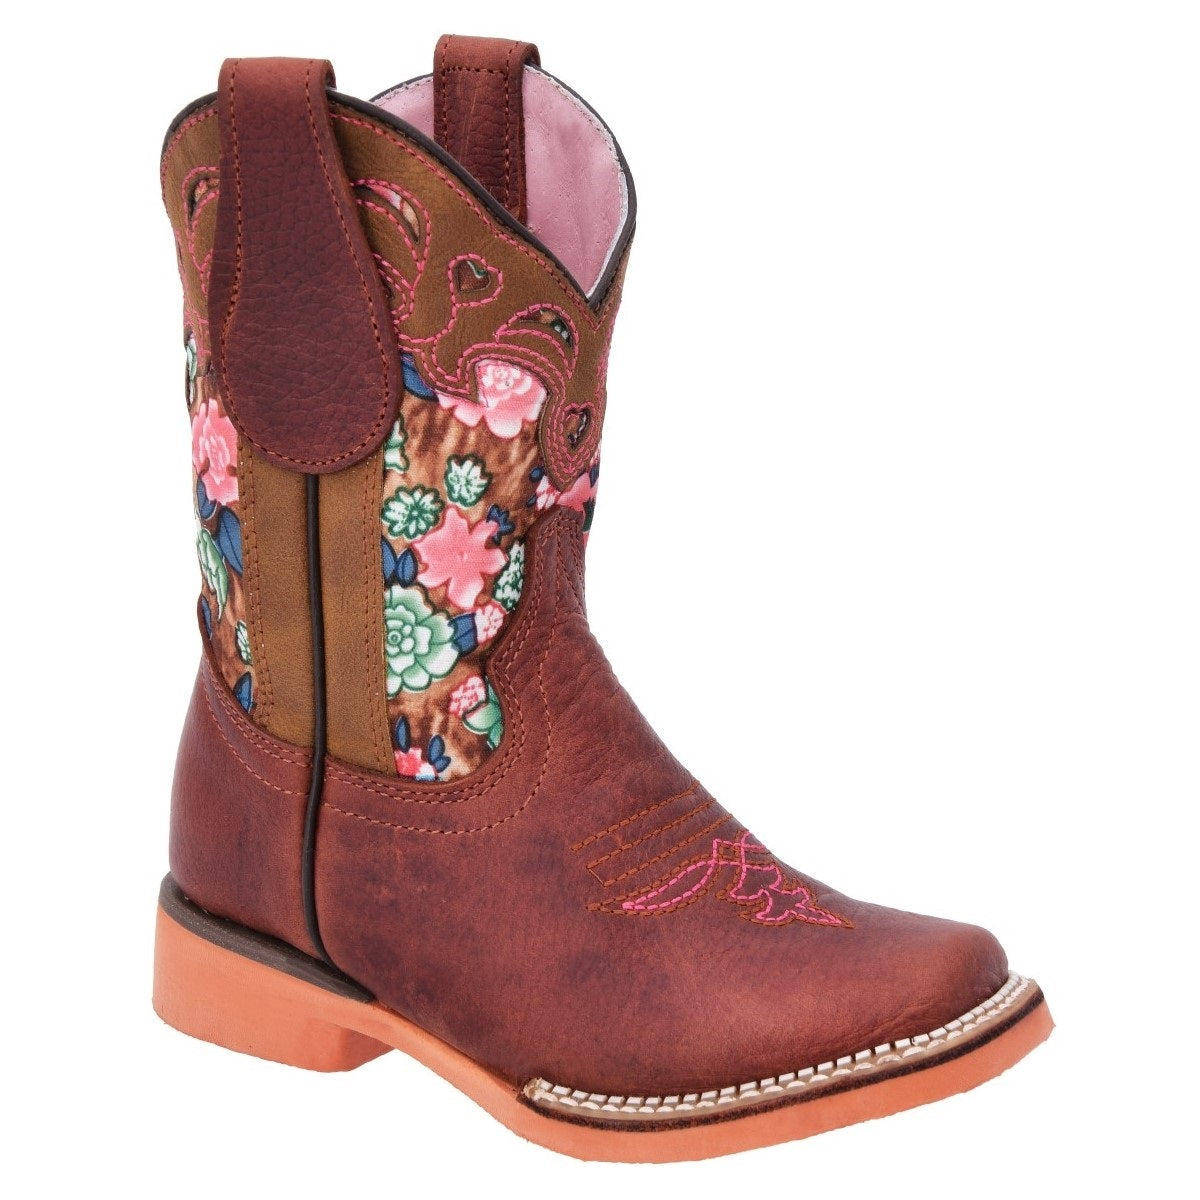 Botas vaqueras ninas TM-WD0400 Western Boots – Nantli's - Online Store | Footwear, Clothing and Accessories